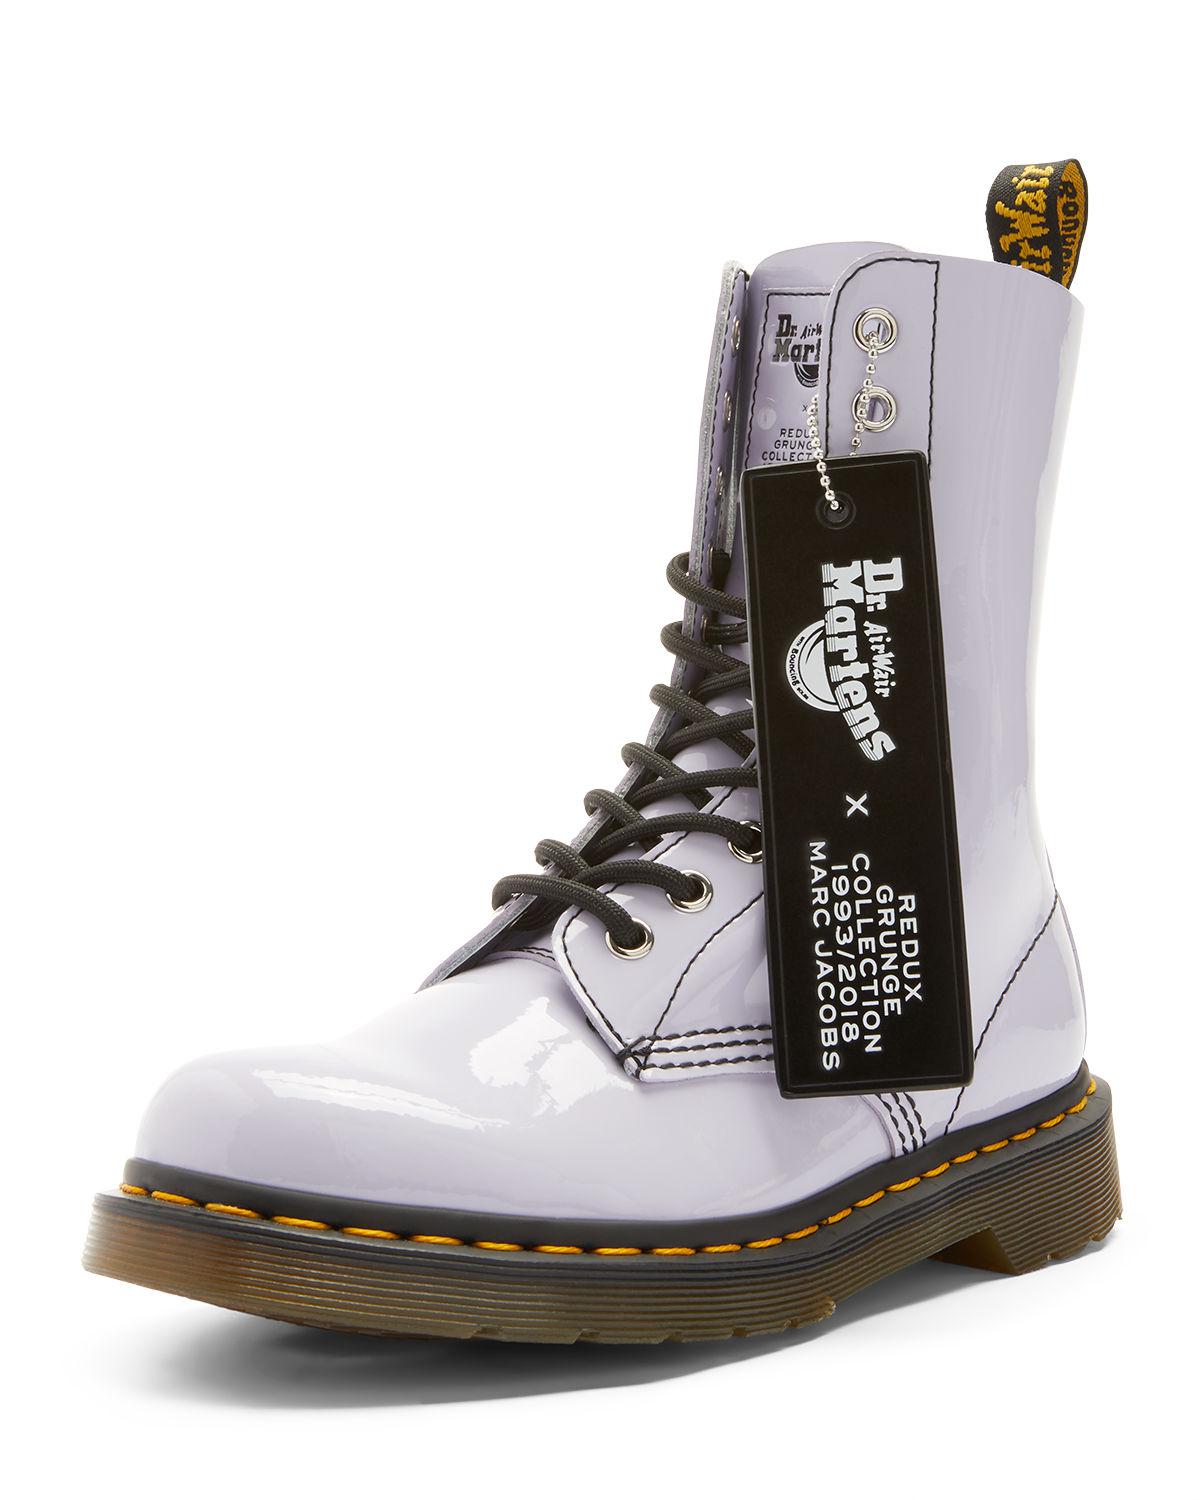 Marc Jacobs Dr. Martens X Patent Leather Combat Boots in Black | Lyst